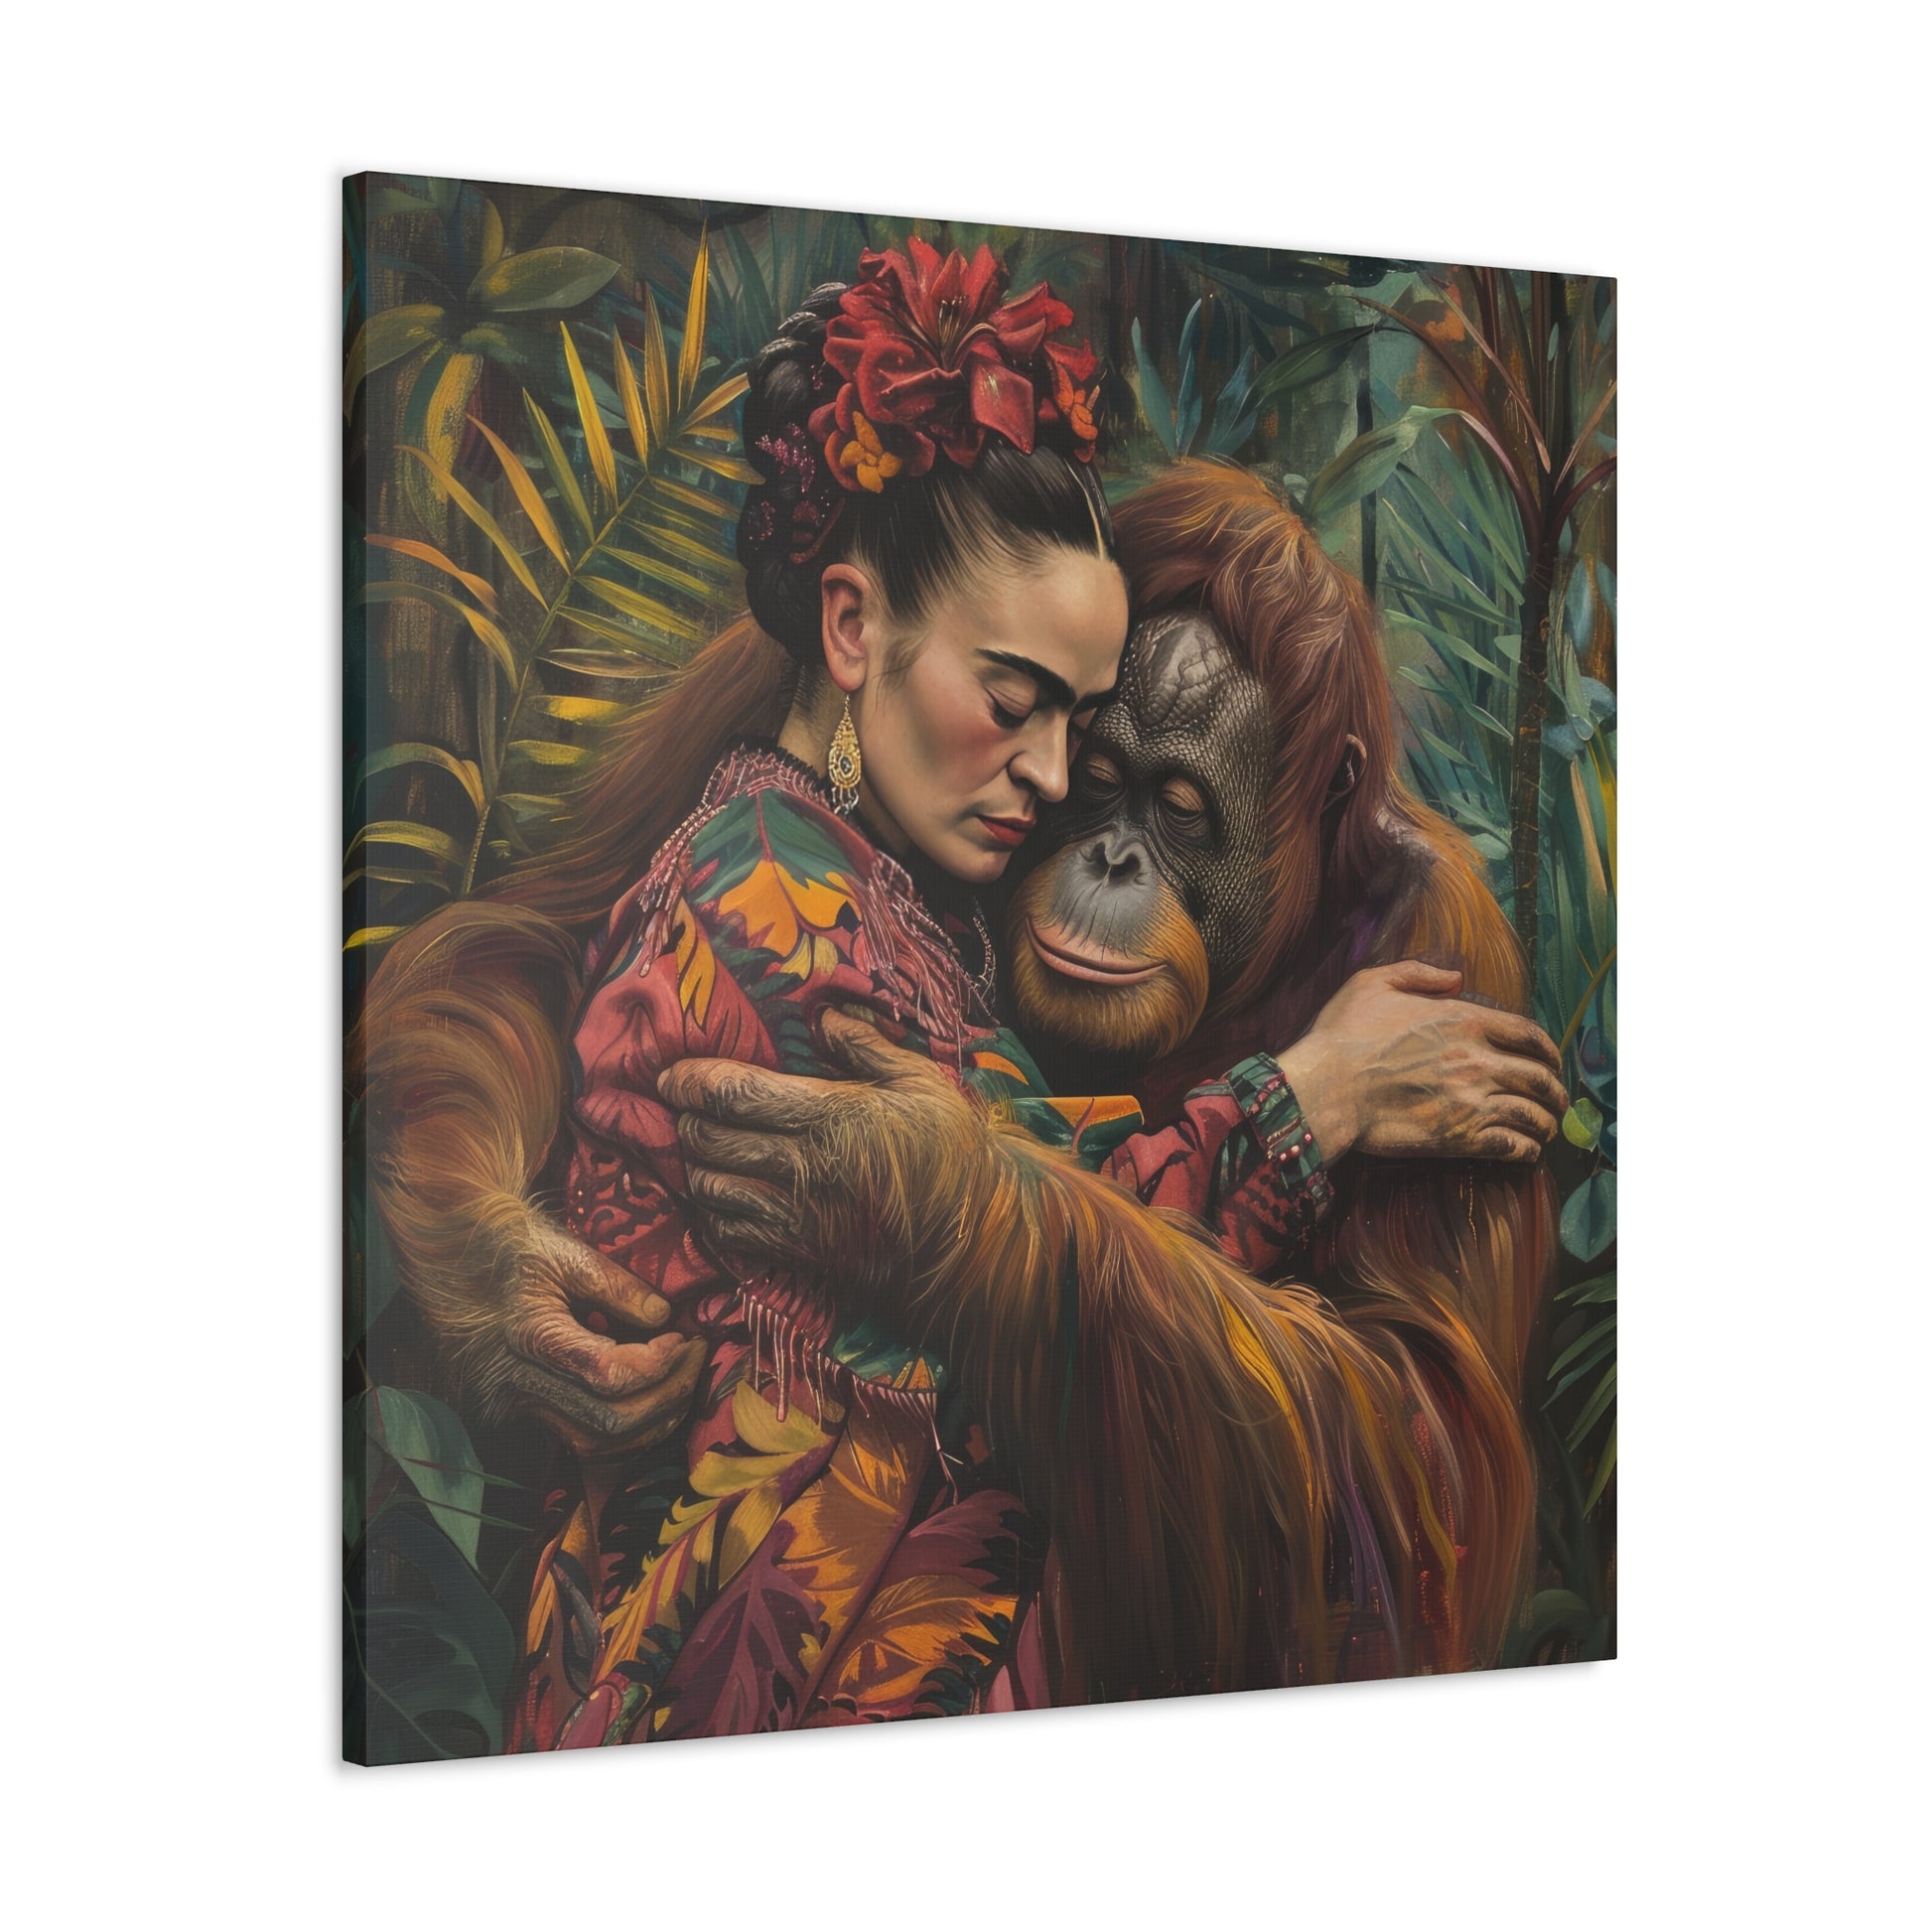 An artistic rendering of a woman embracing an orangutan amidst lush foliage, captured in a vibrant David Miller. Embrace of the Wild. Exclusive Canvas Print by Printify.